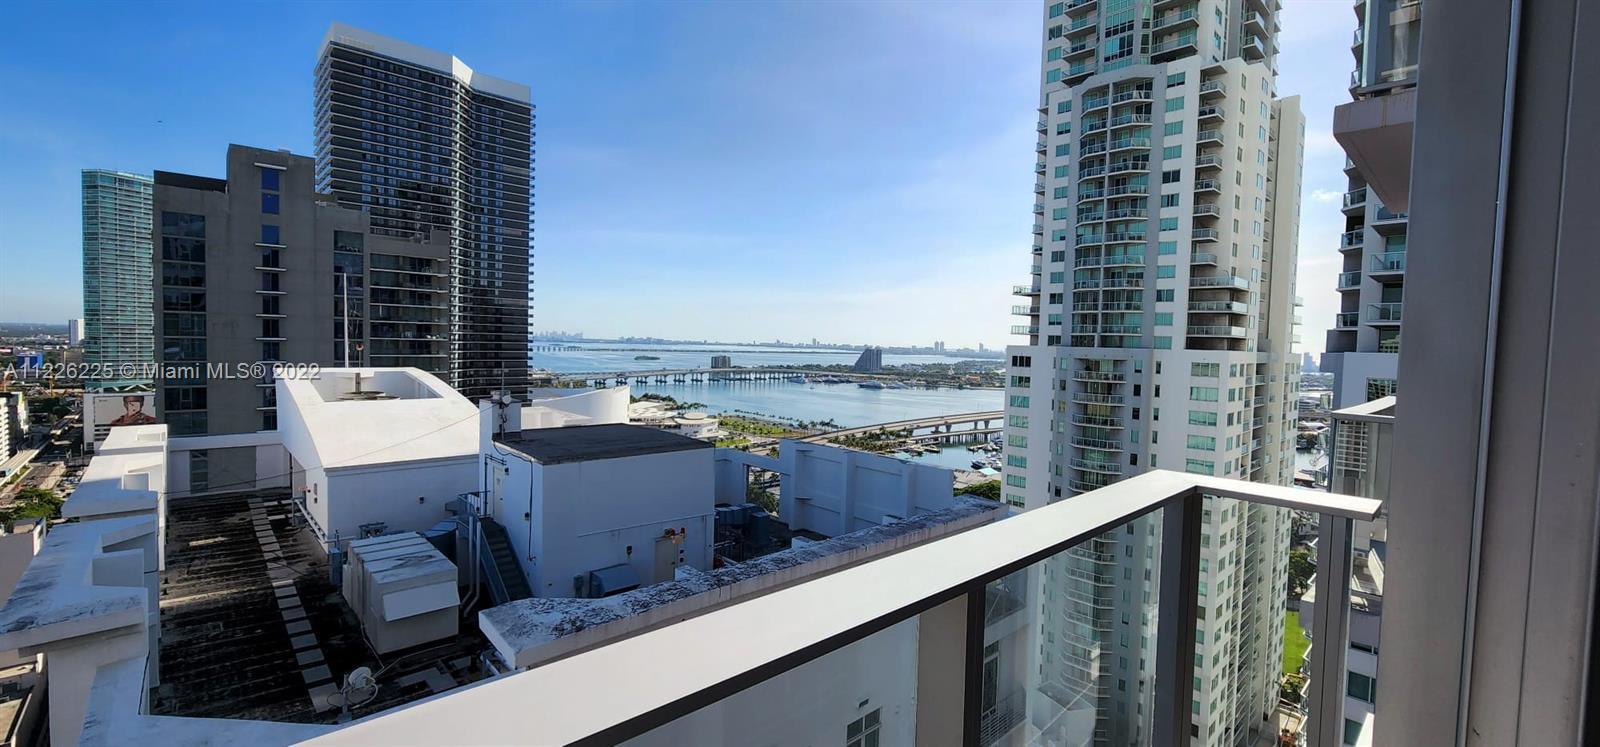 ***PERFECT FOR INVESTORS! SHORT AND LONG TERM ALLOWED!!***
Incredible water views - TURNKEY studio 